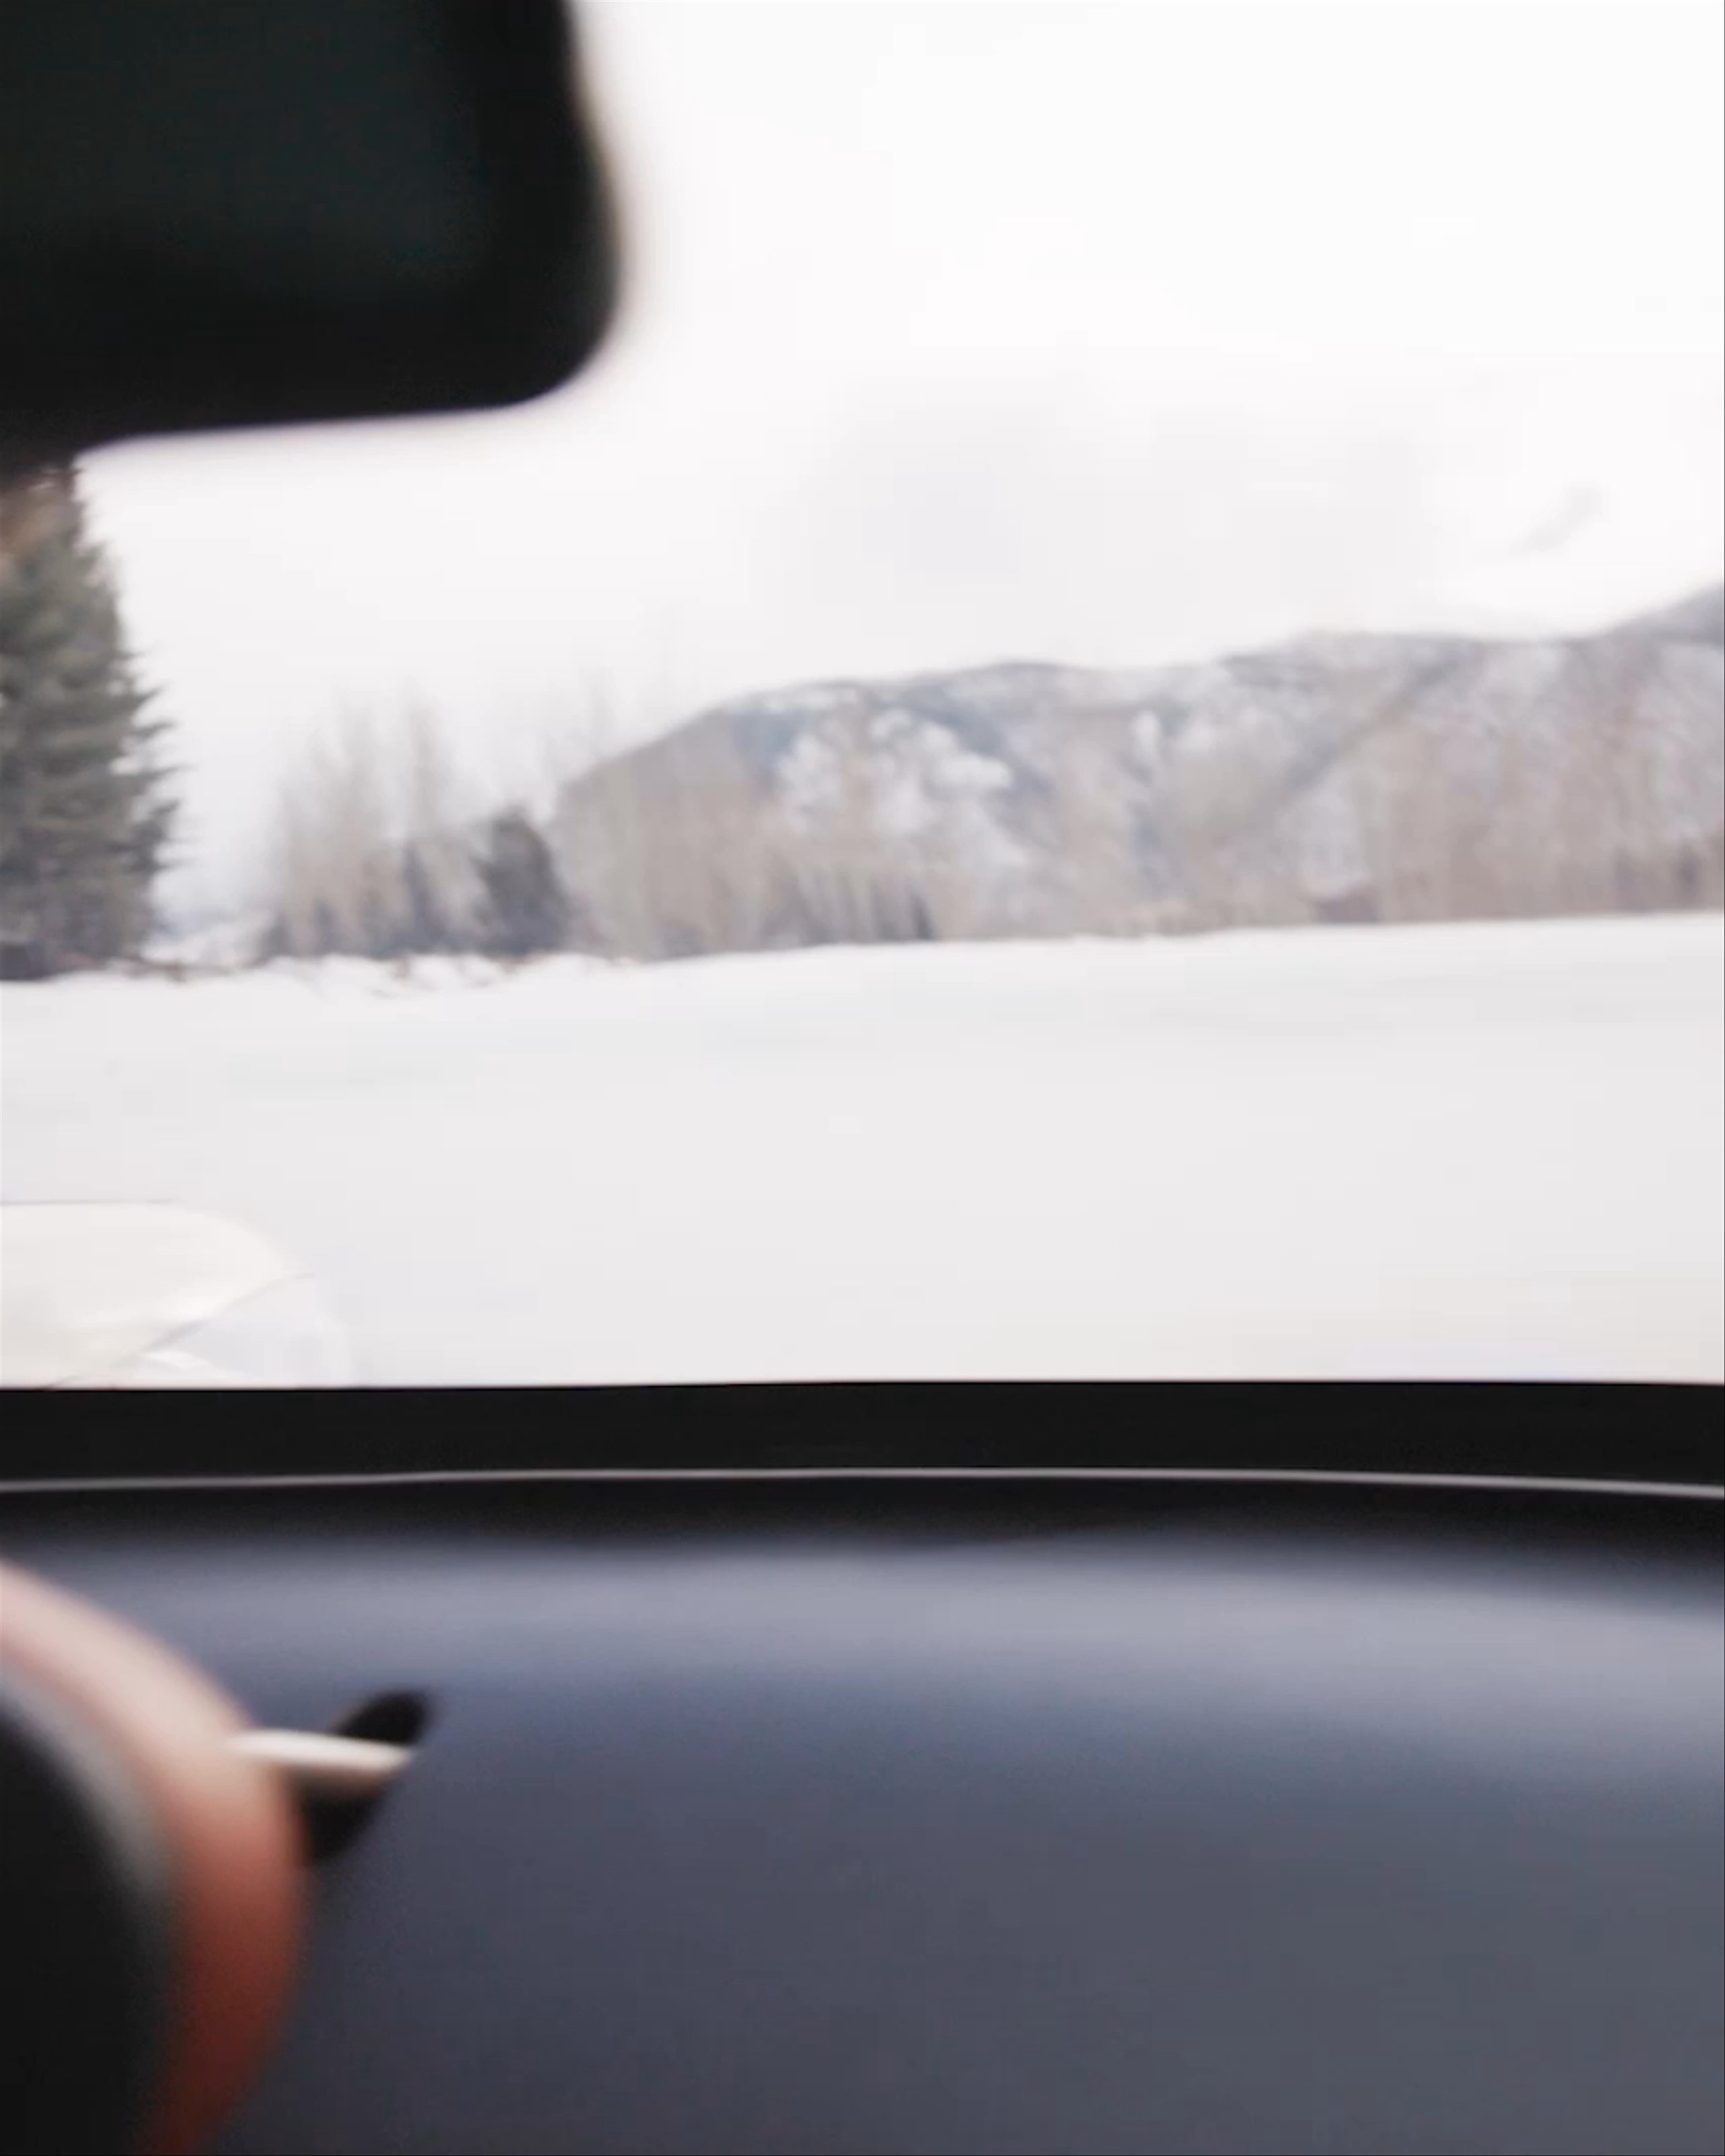 Video inside car of driver steering on the icy race track